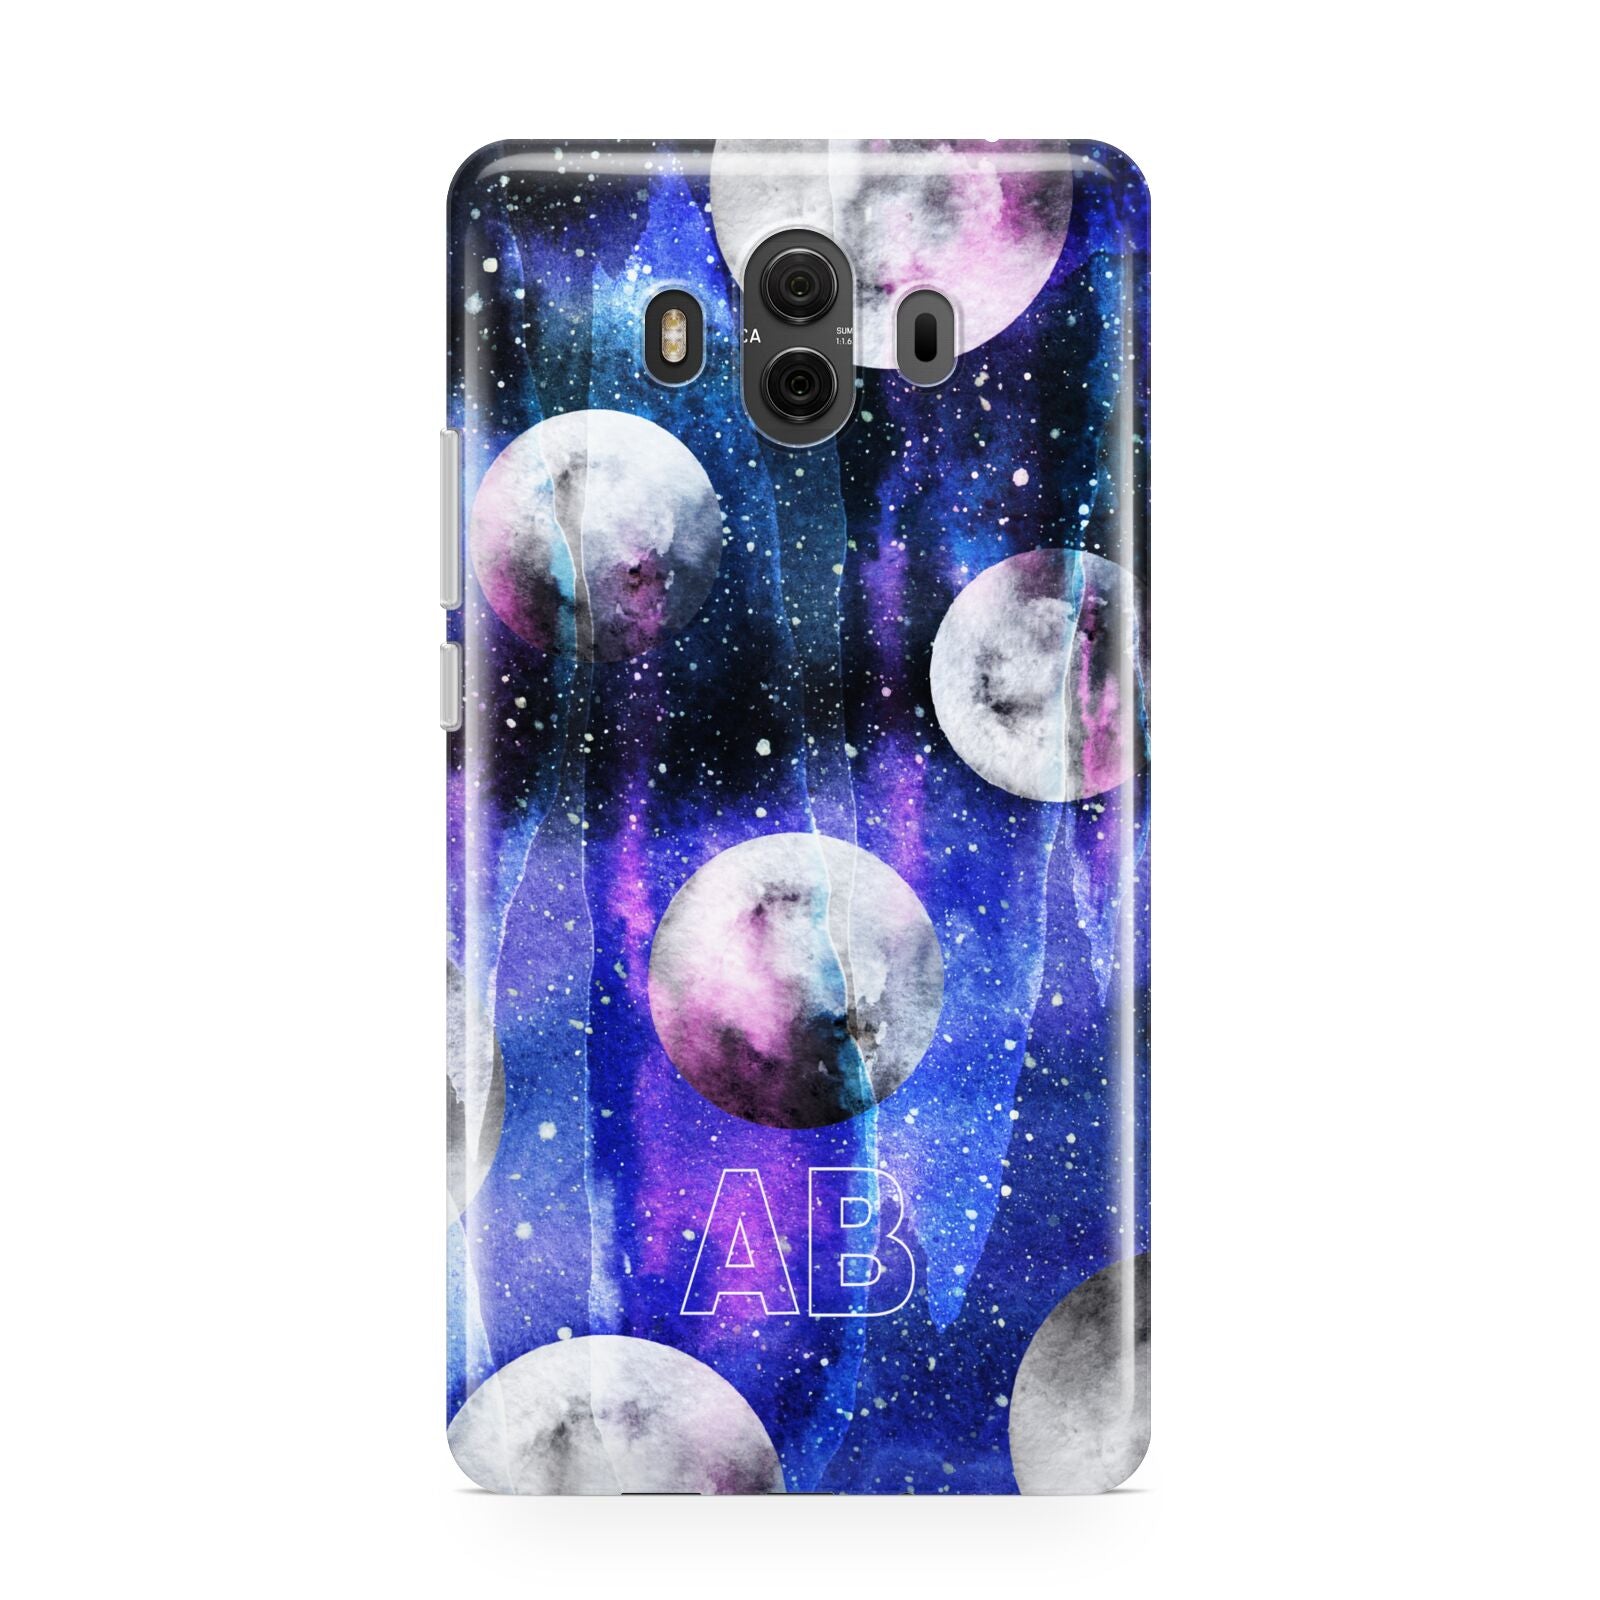 Personalised Cosmic Huawei Mate 10 Protective Phone Case